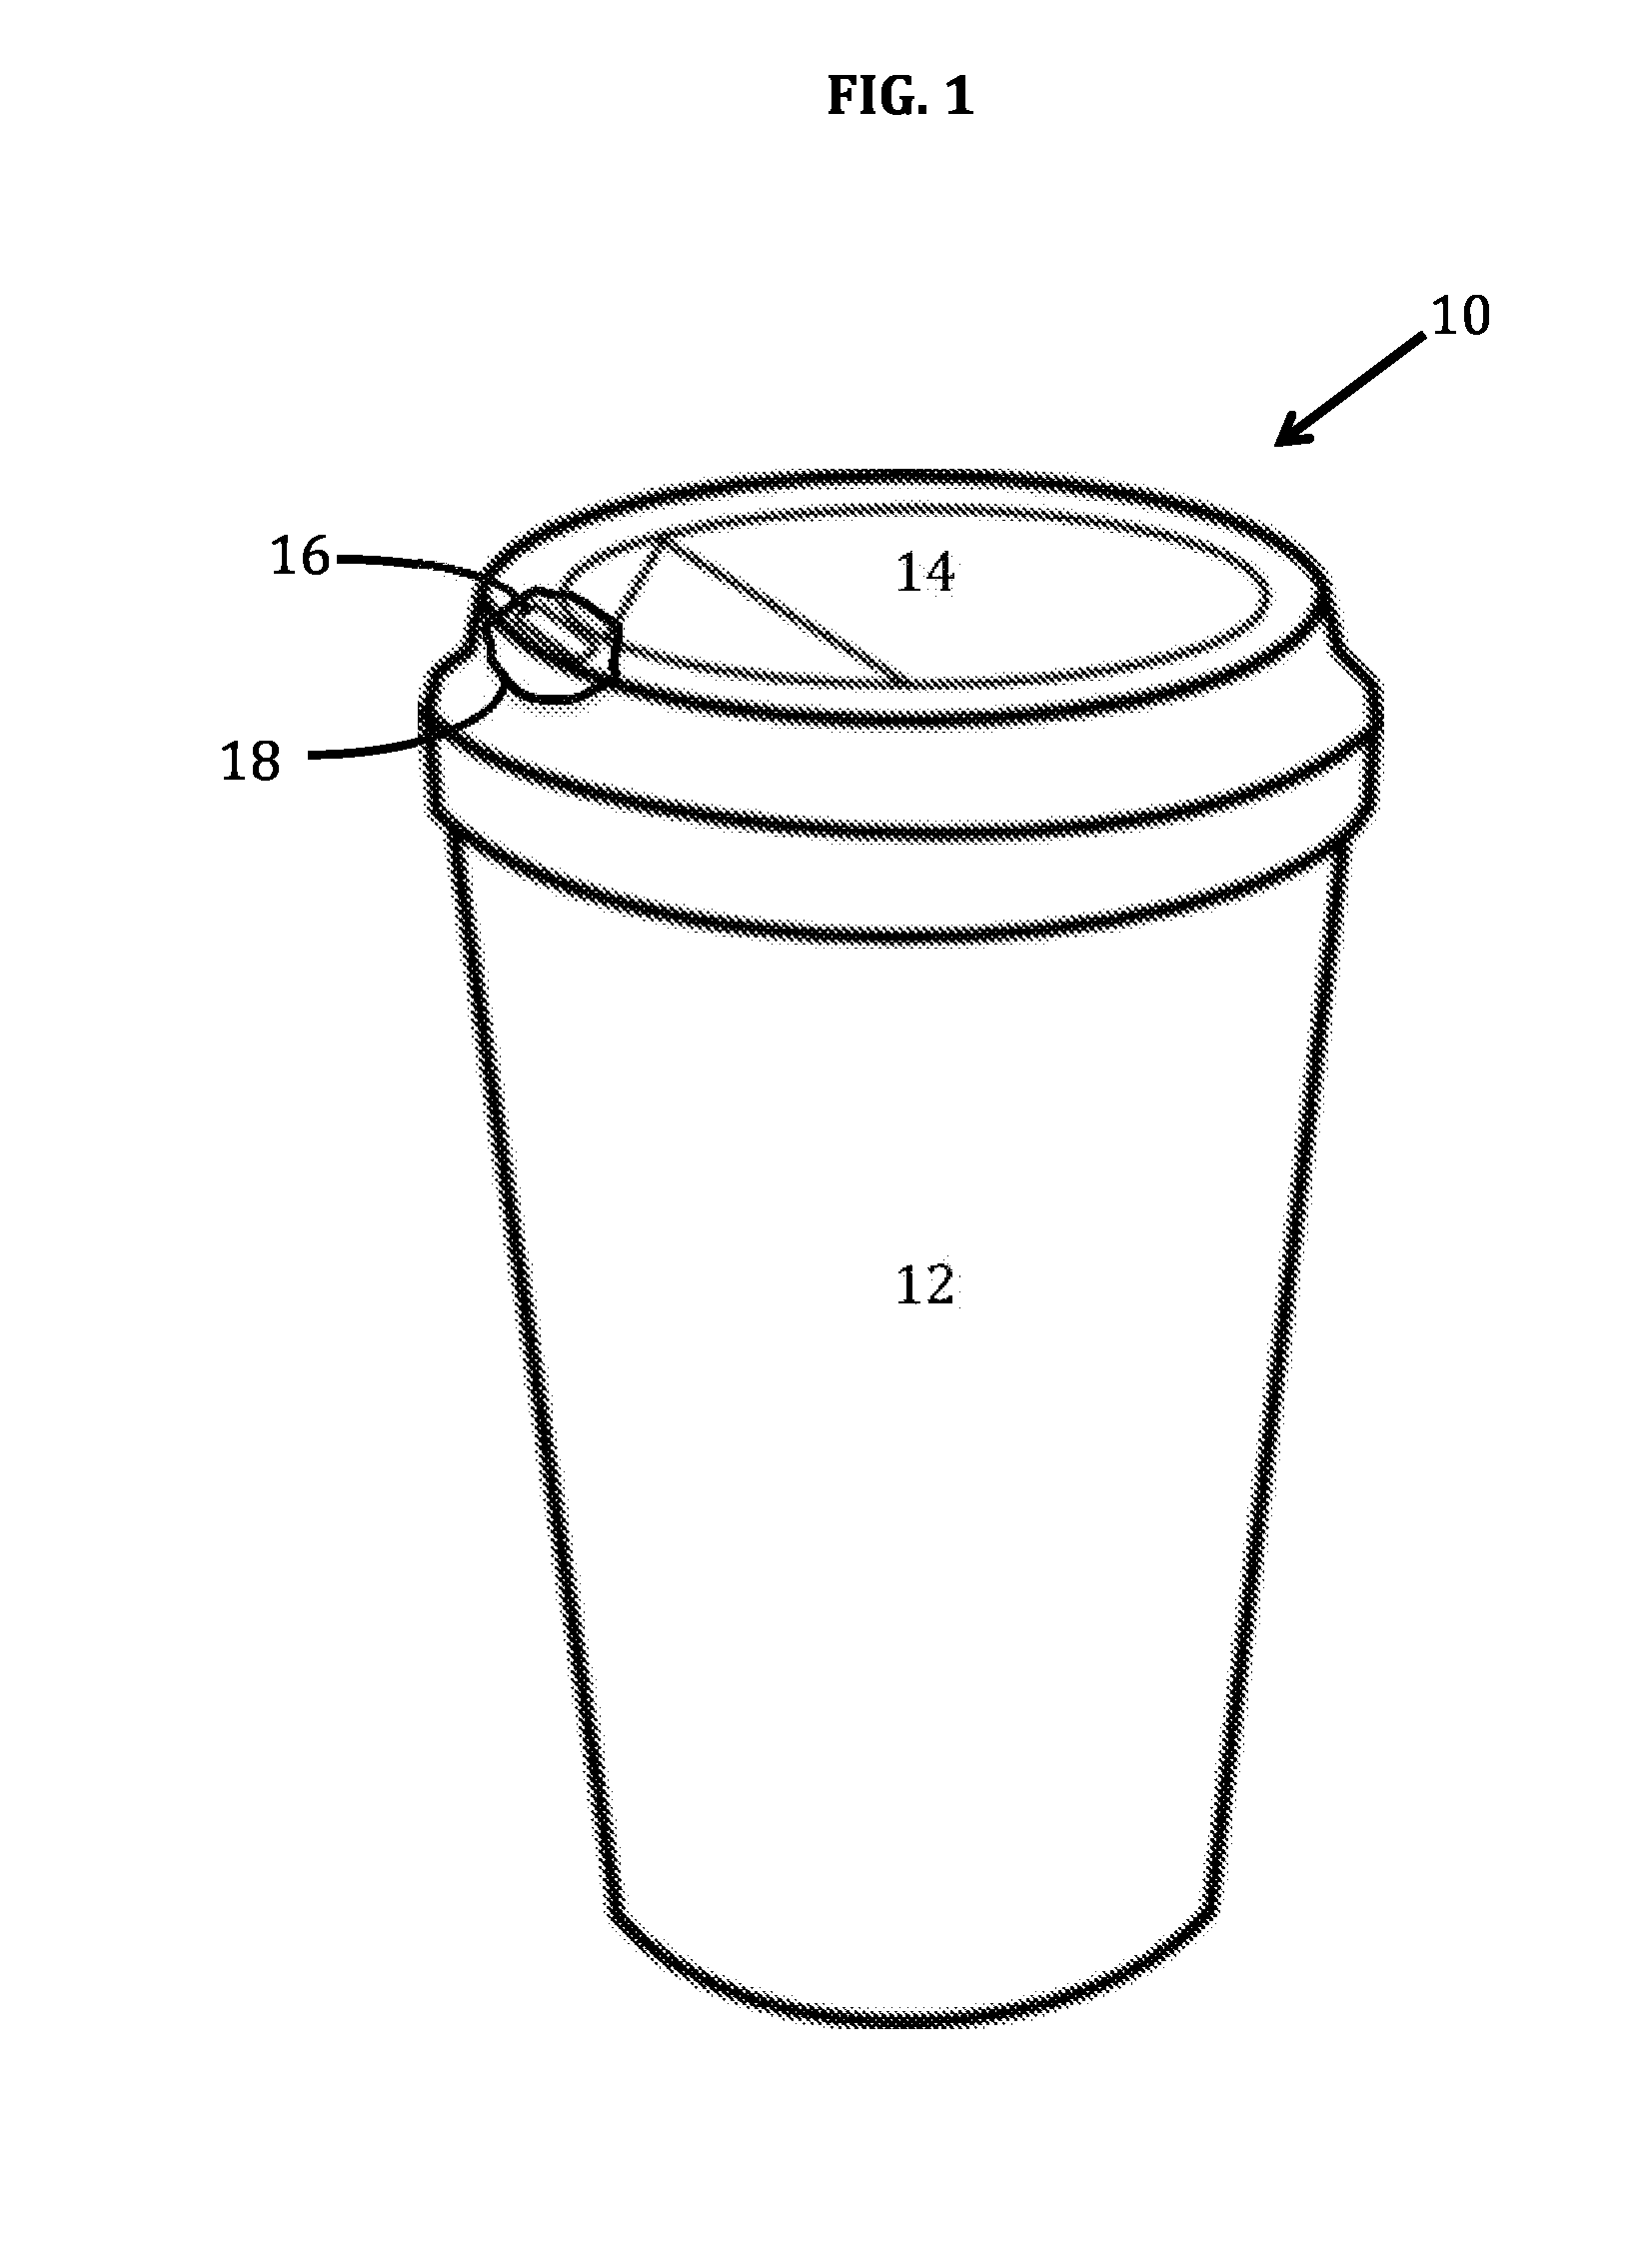 Drinking container having illuminated outlet